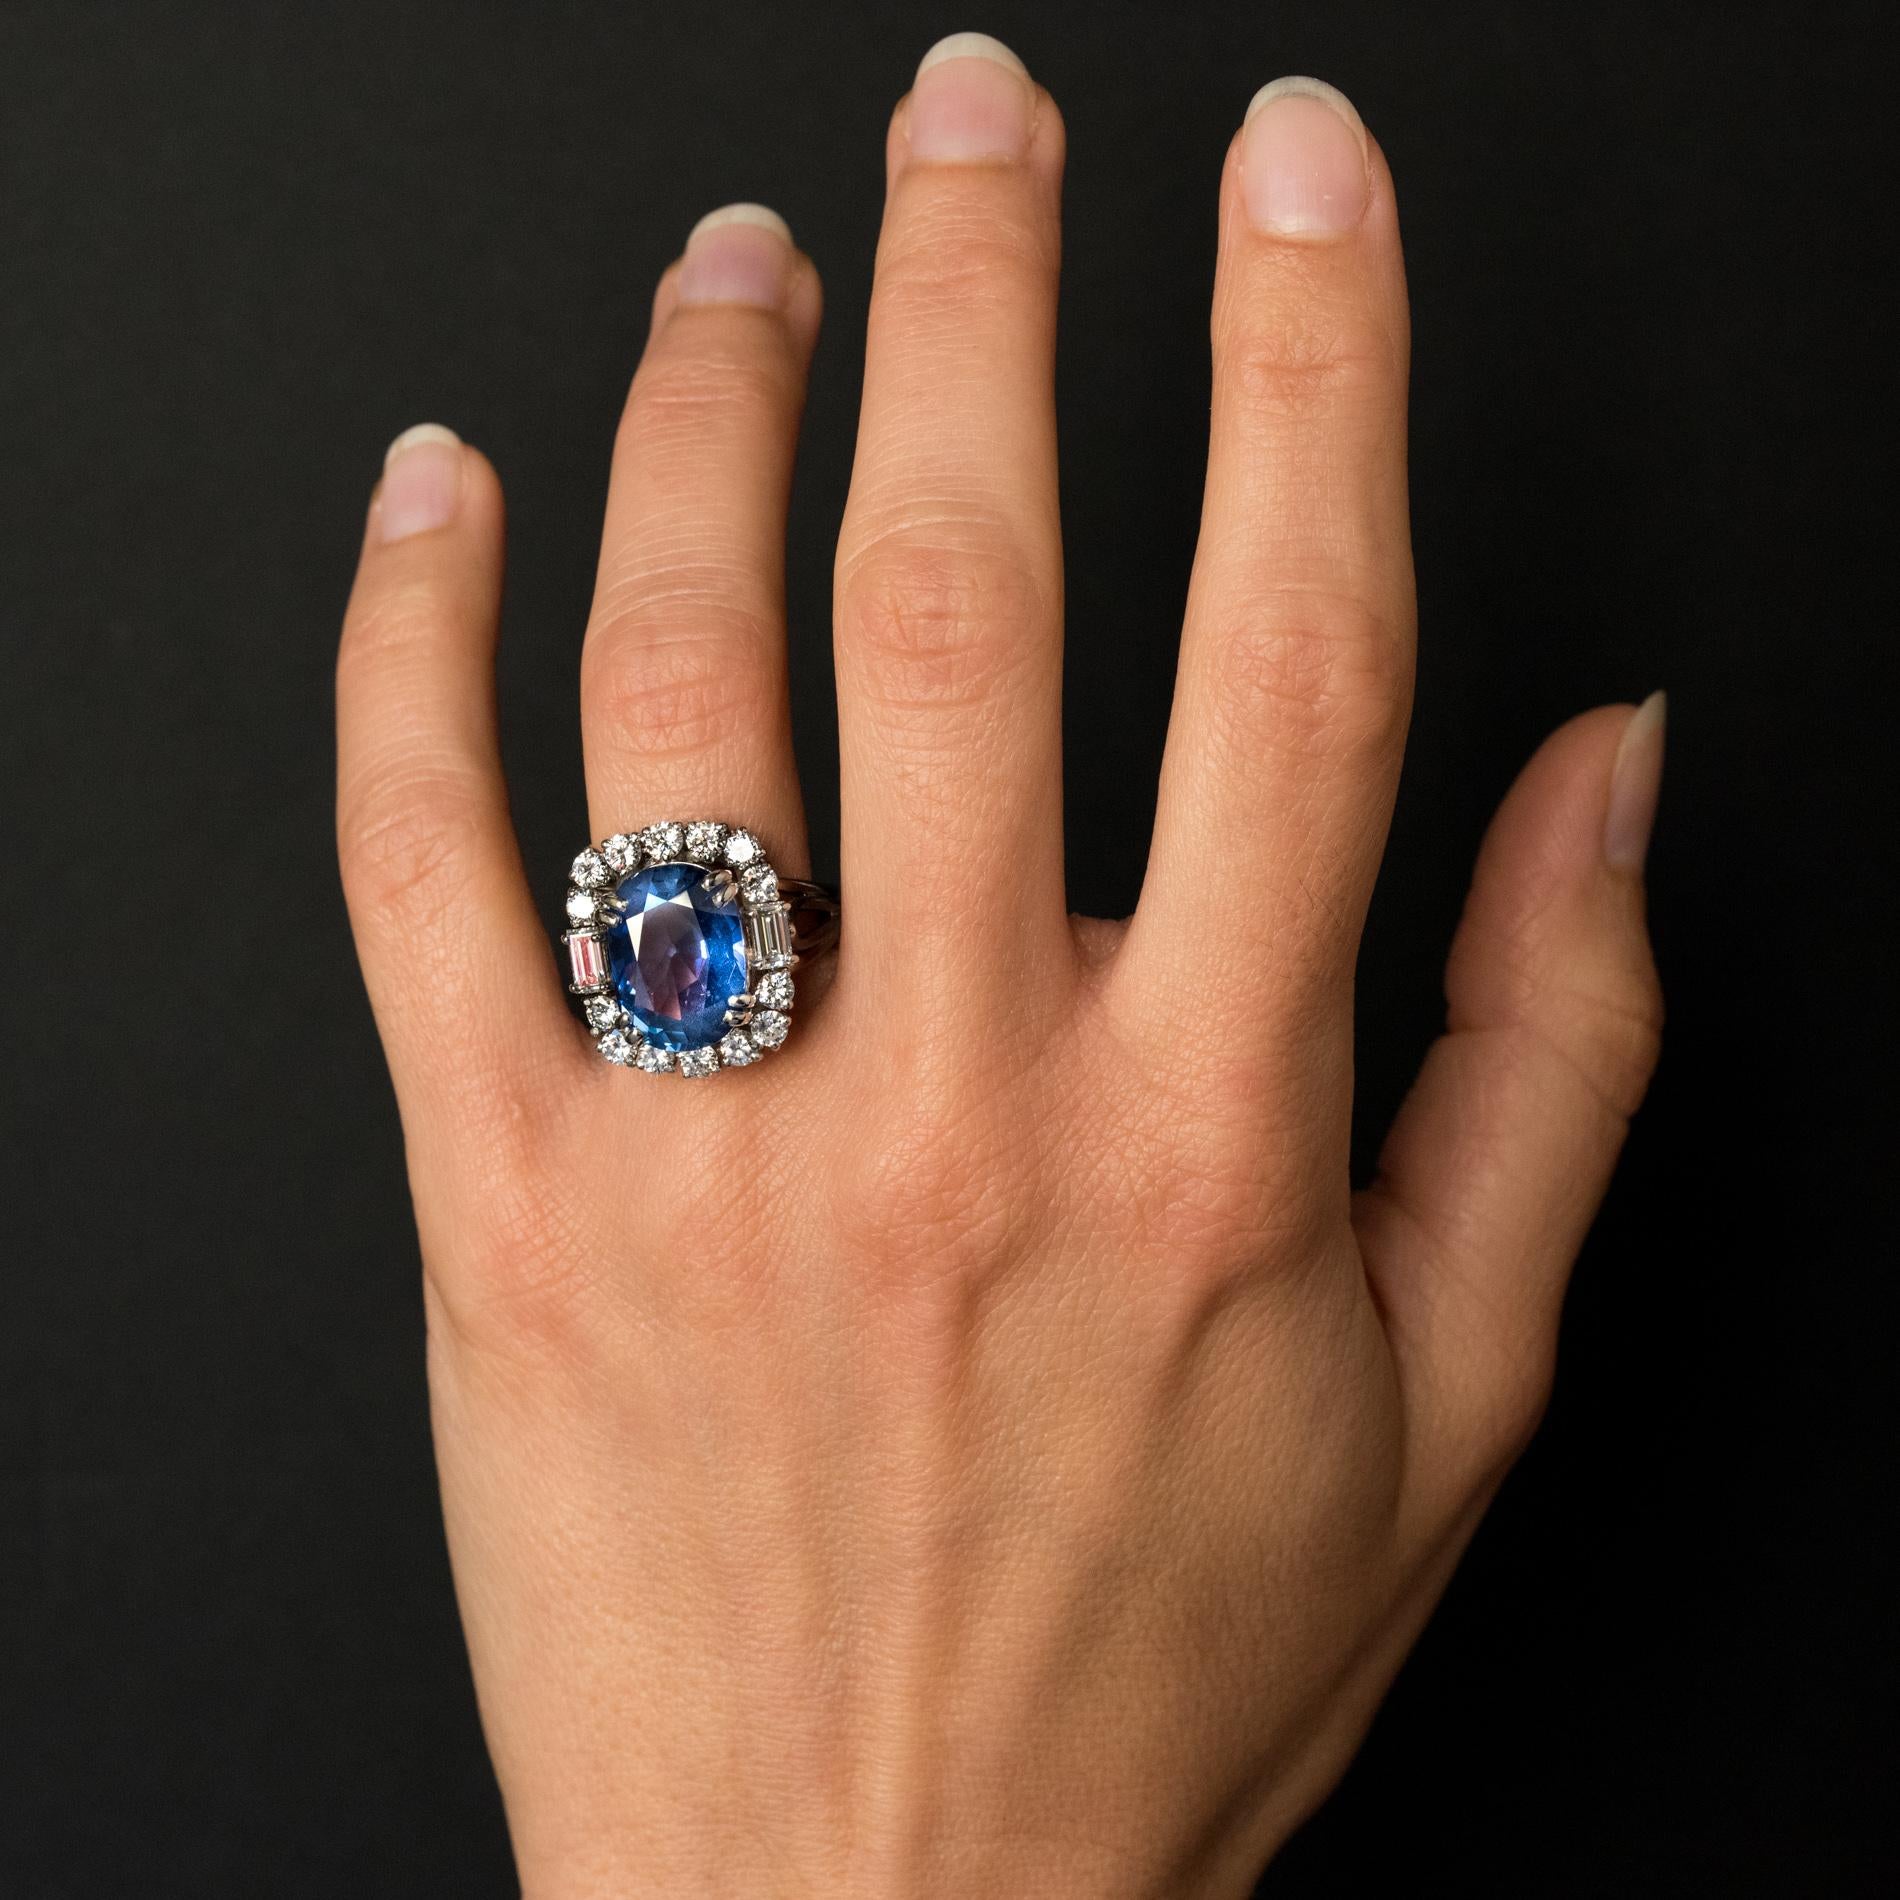 Ring in platinum, dog's head hallmark.
Important rectangular shape antique ring, it is set with 4 double claws, of an oval blue sapphire surrounded by 2 x 7 brilliant- cut diamonds and shouldered with 2 baguette diamonds. The ring consists of wires